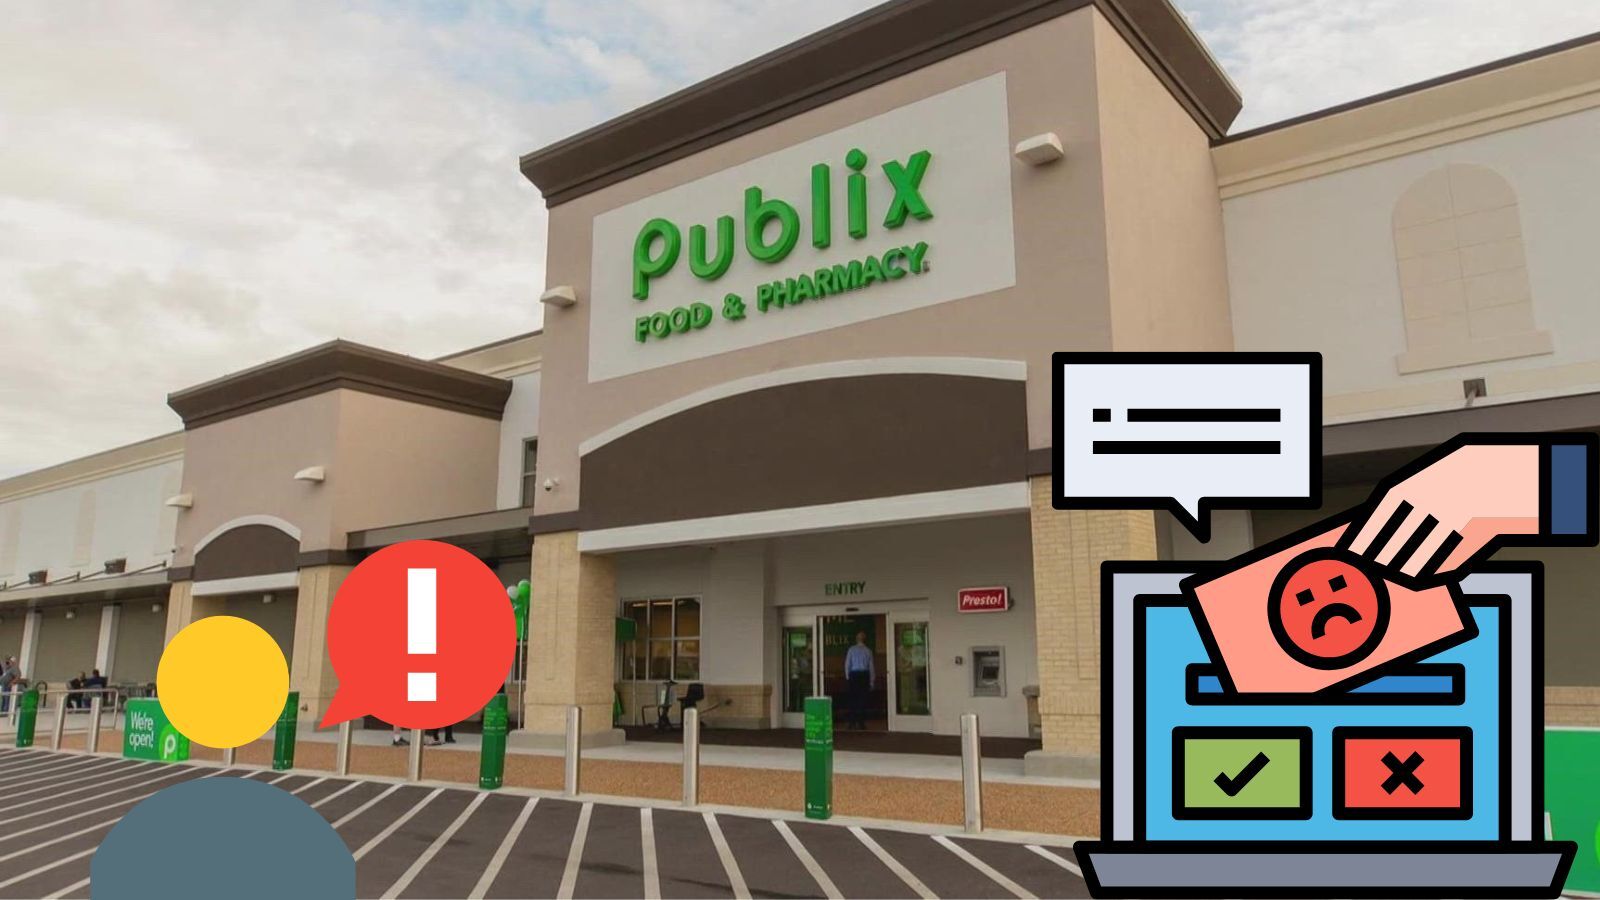 Publix Complaints: How to Make One and Other Things You Care About